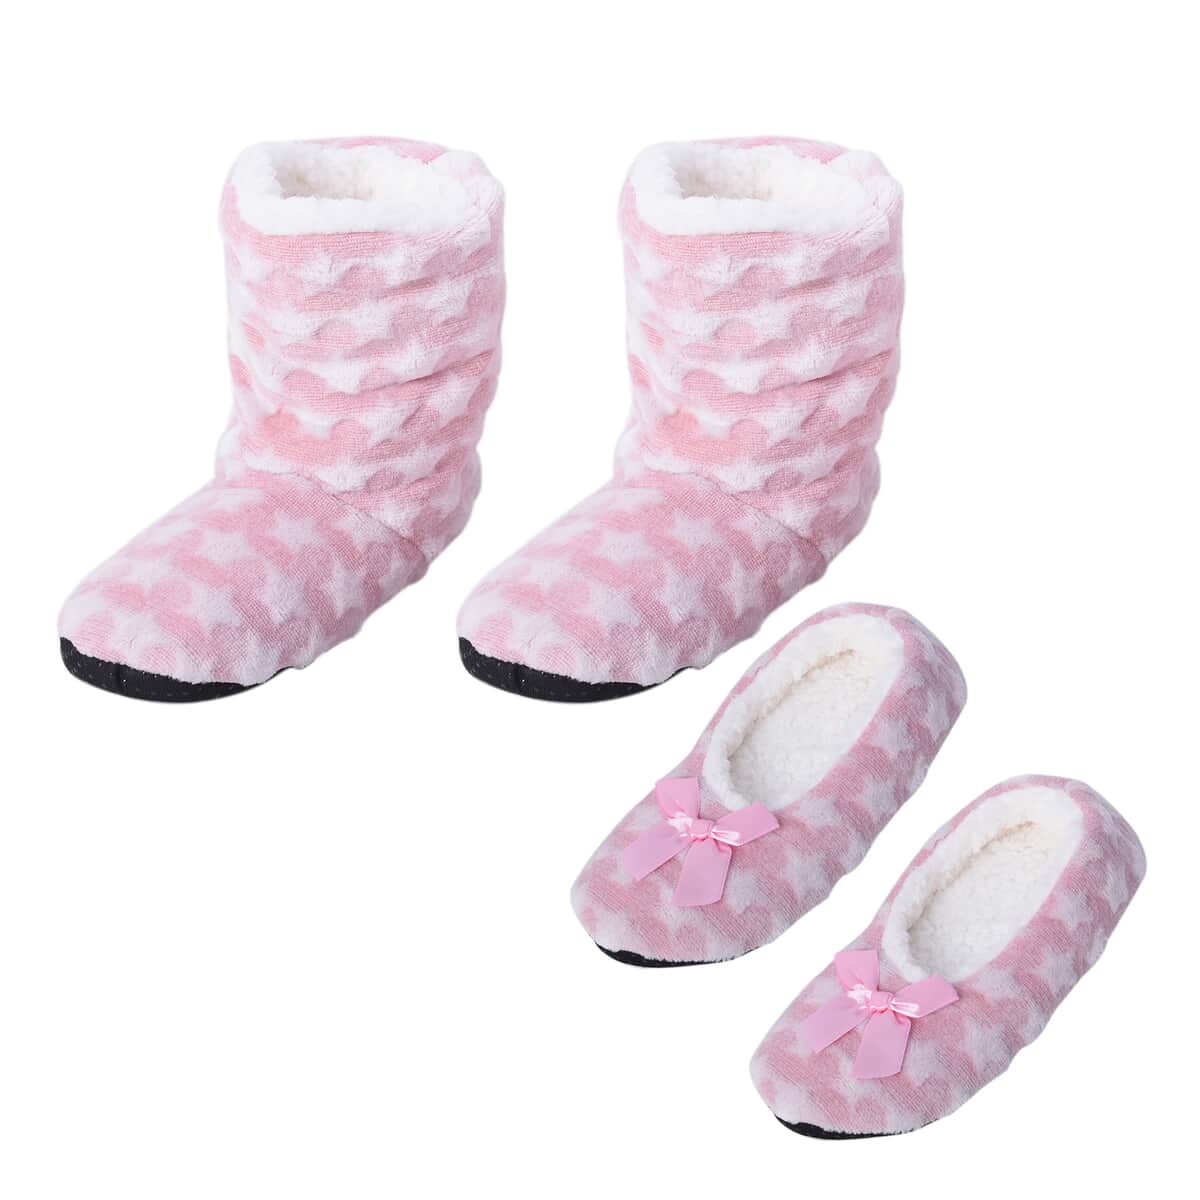 HOMESMART Pink Star Pattern Microfiber Faux Fur, Sherpa Booties and Matching Ballerina Slippers (Women's Size 5-10) image number 0